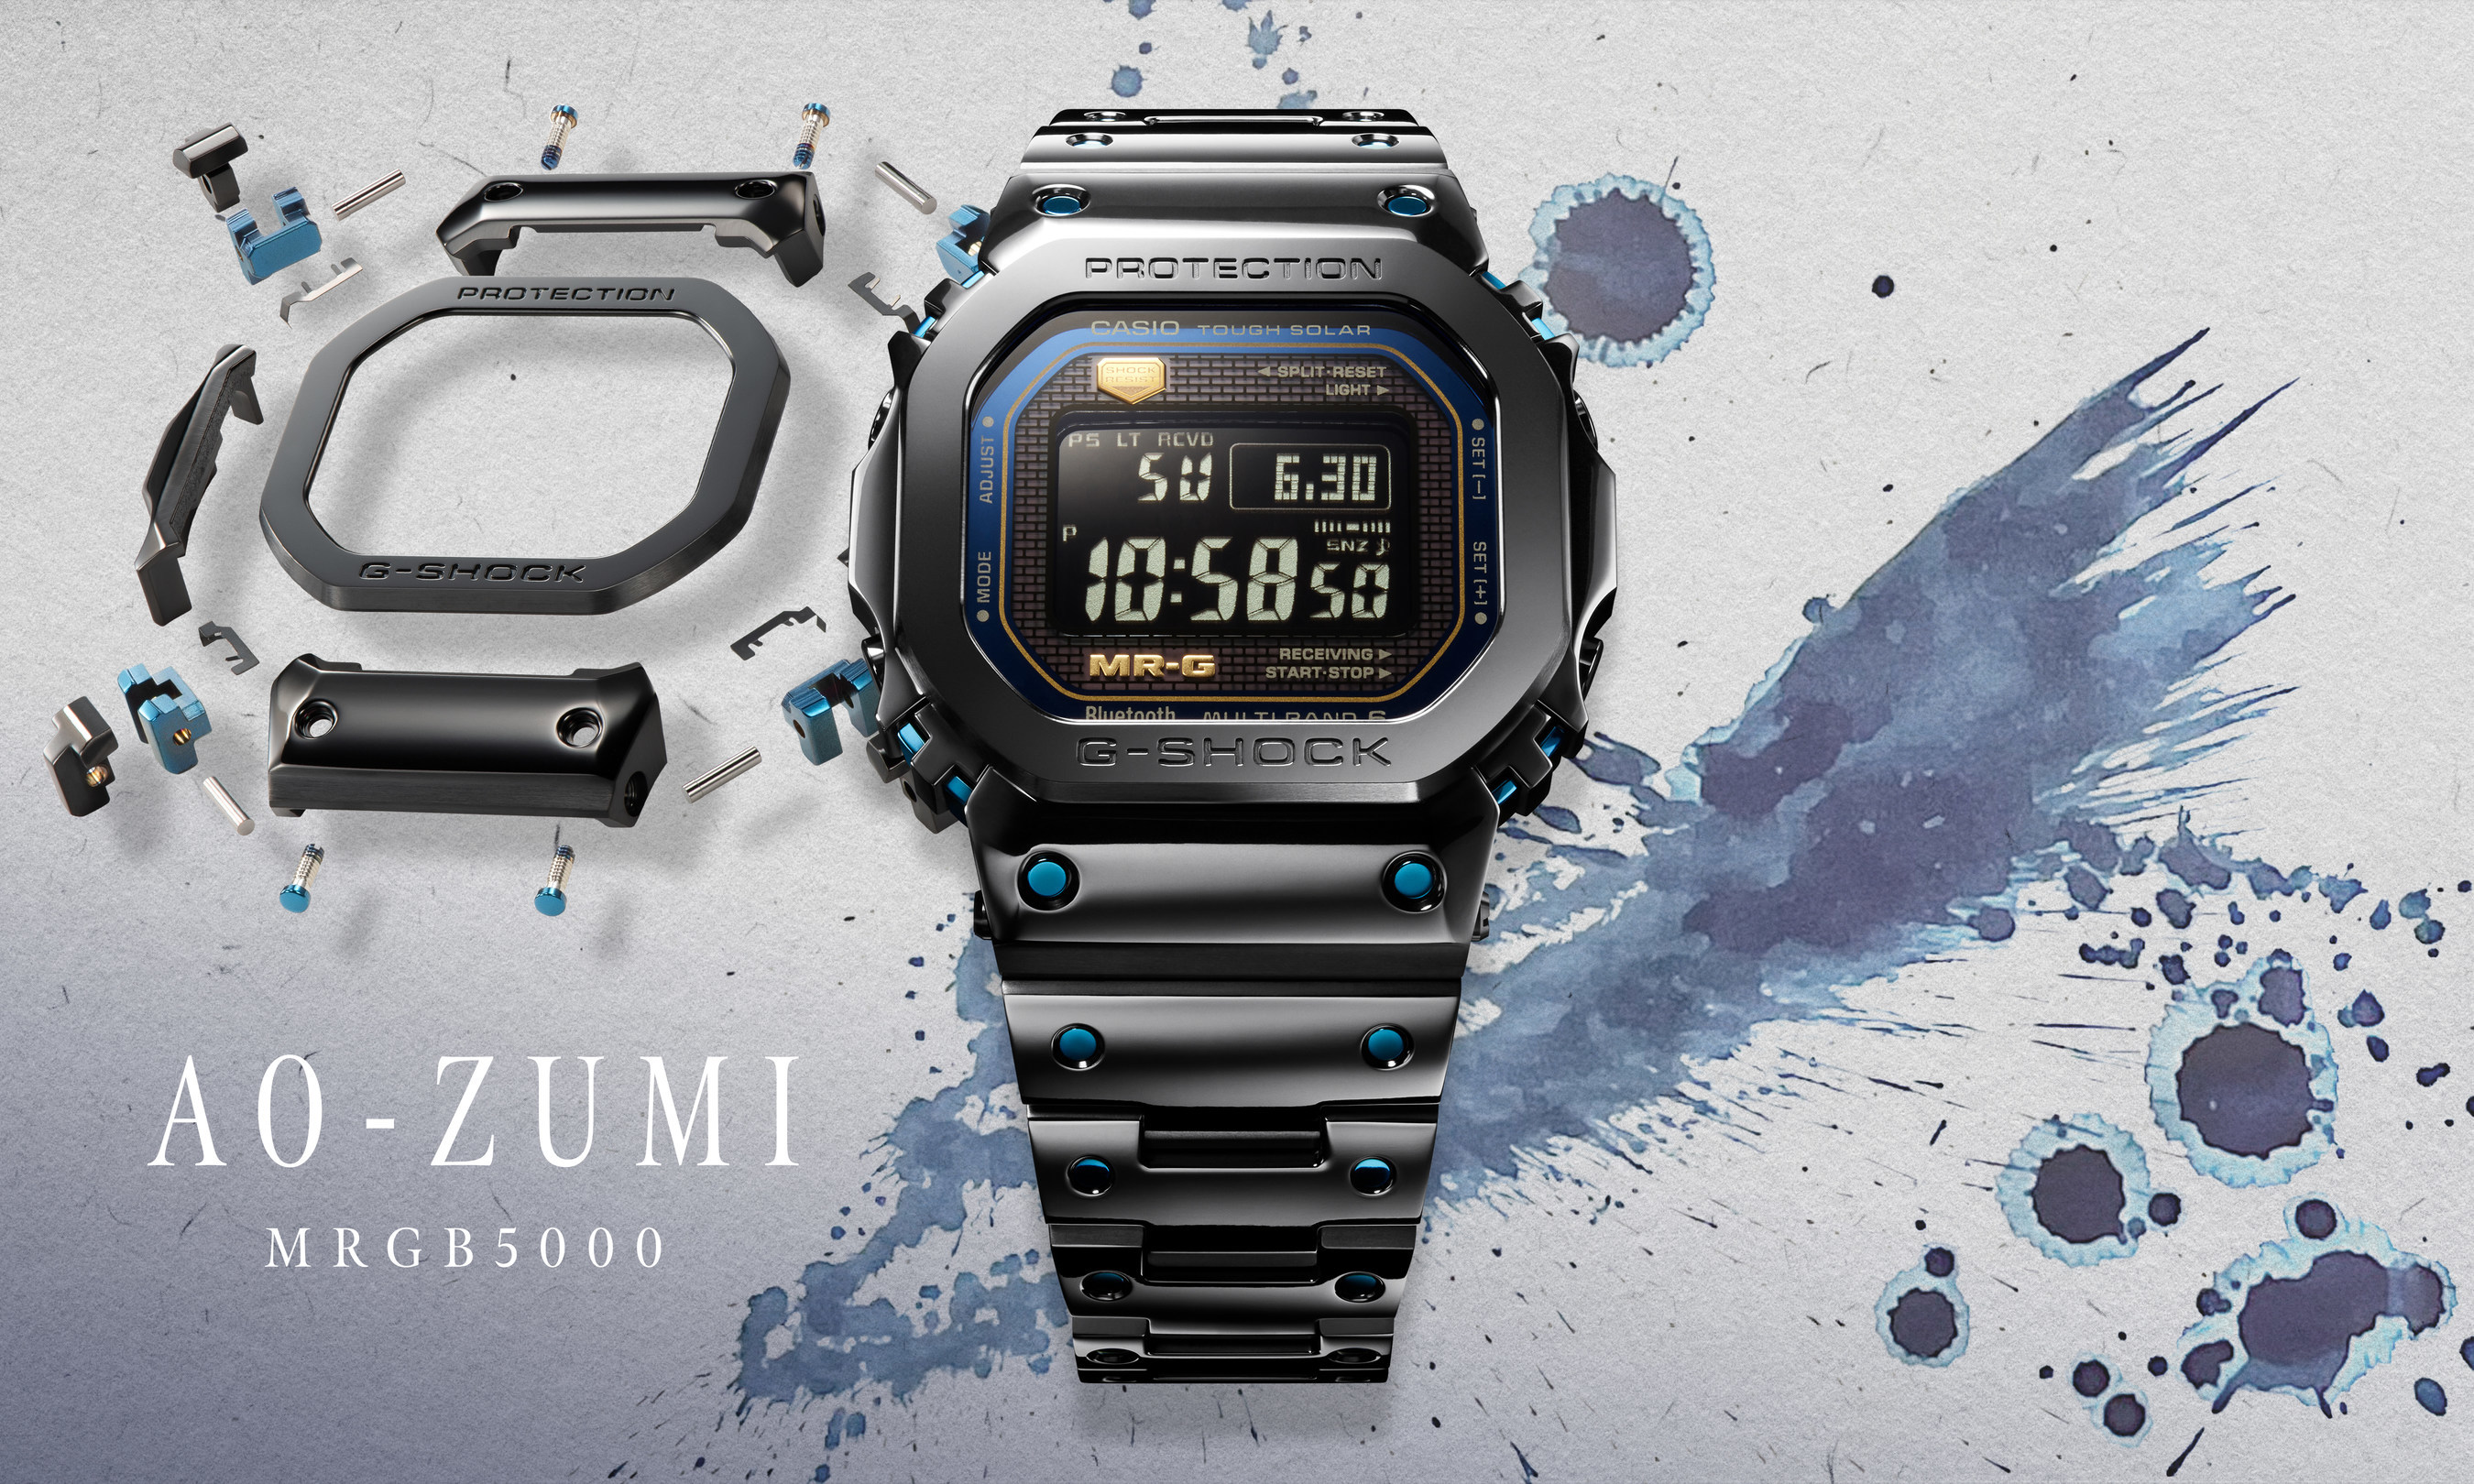 CASIO G-SHOCK INTRODUCES NEW MODEL TO LUXURY MR-G LINE WITH SOPHISTICATED BLACK MIRRORED FINISH